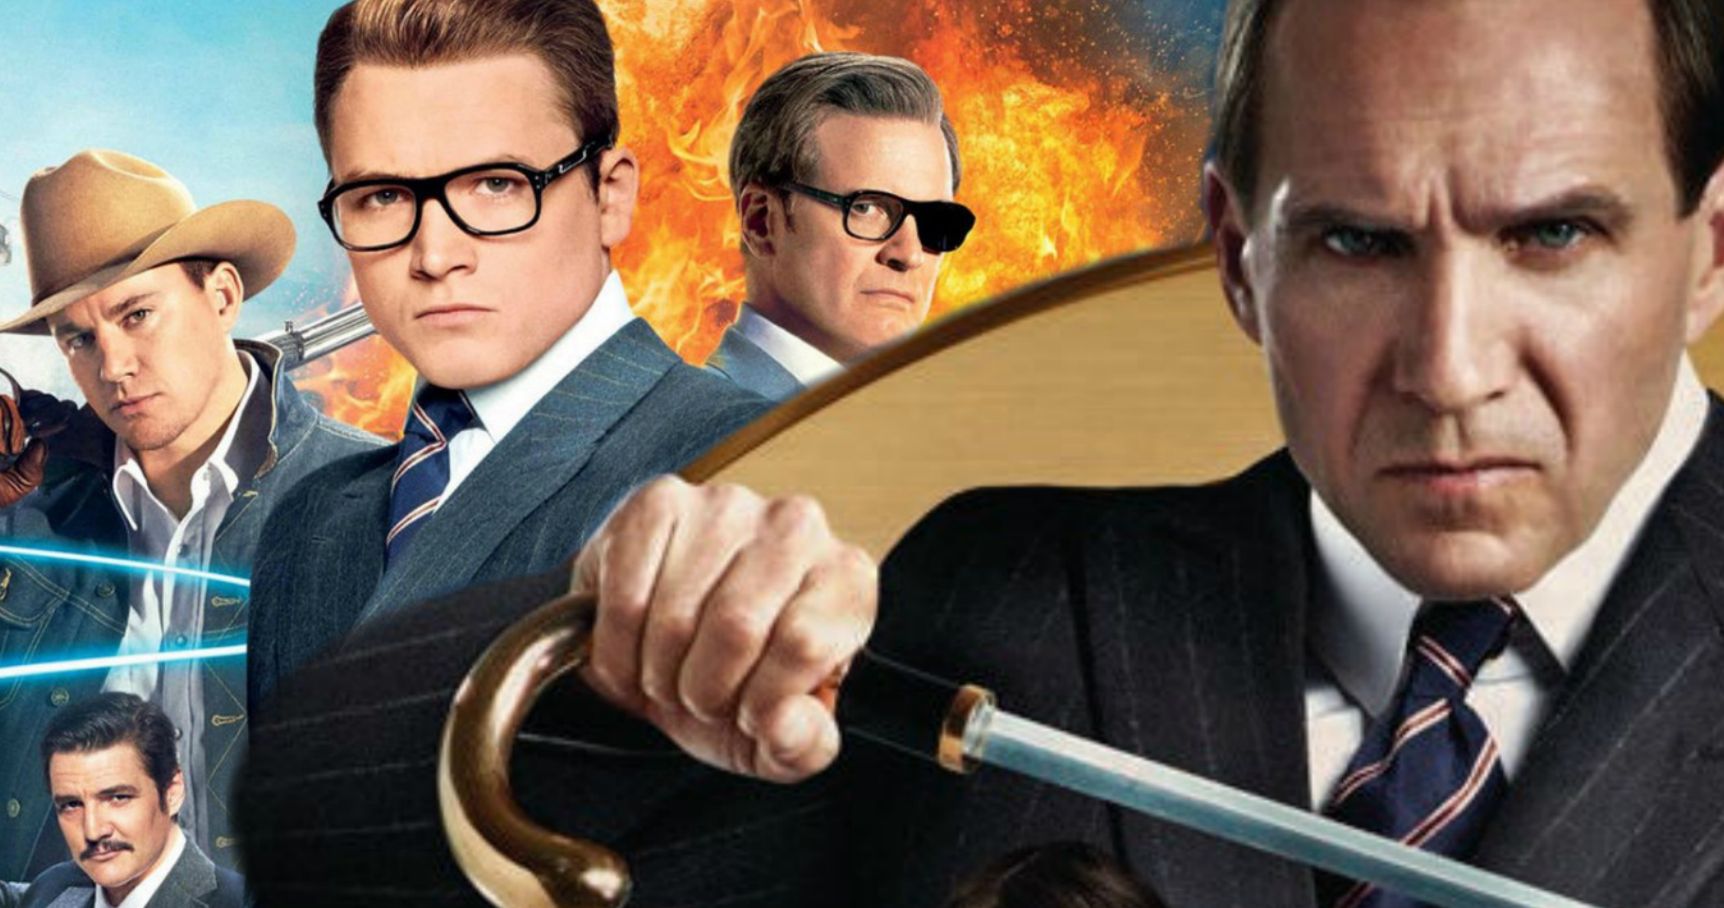 Kingsman 3 Seeds Will Be Planted in The King's Man Prequel Coming This September